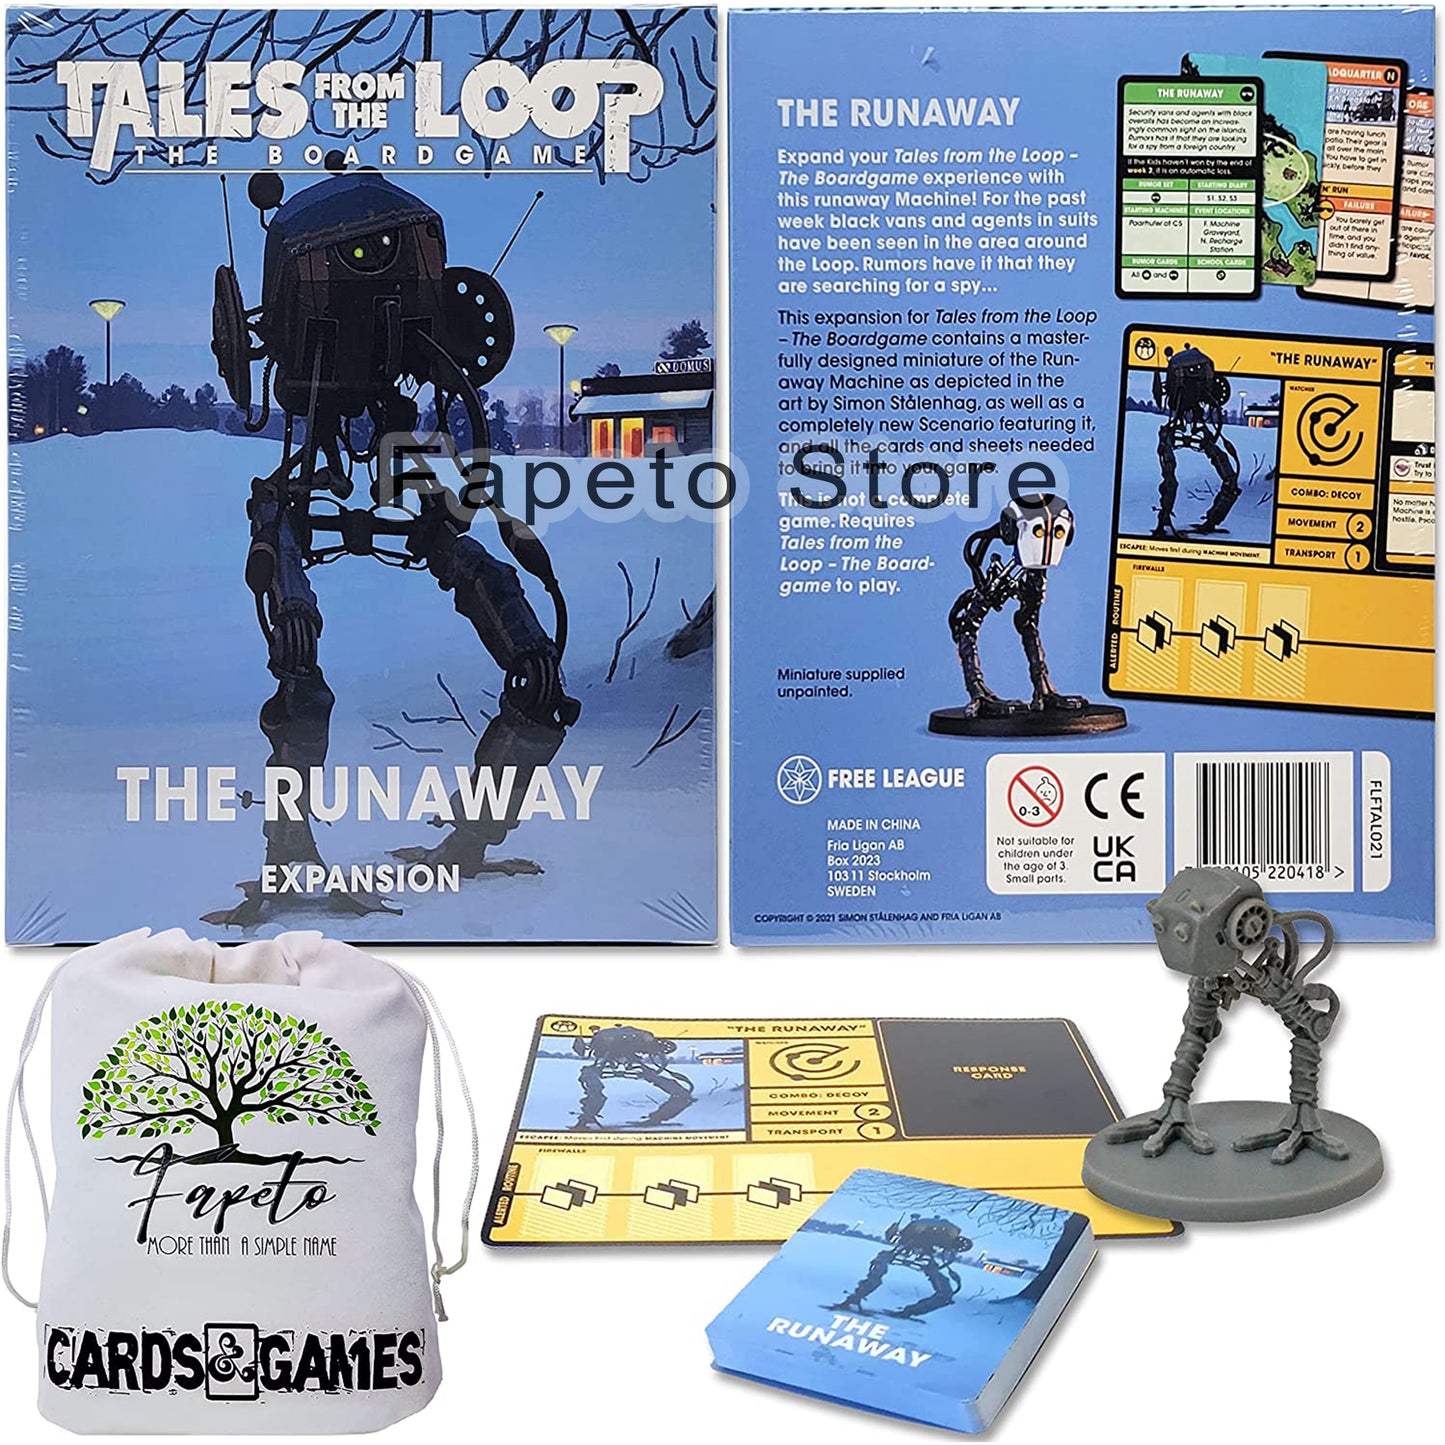 Cooperative Game Tales from The Loop Base and Expansions: Invasive Species Scenario & The Runaway Scenario Pack COMPATIBLES with Tales from The Loop Board Game Bundle with Random Color Drawstring Bag